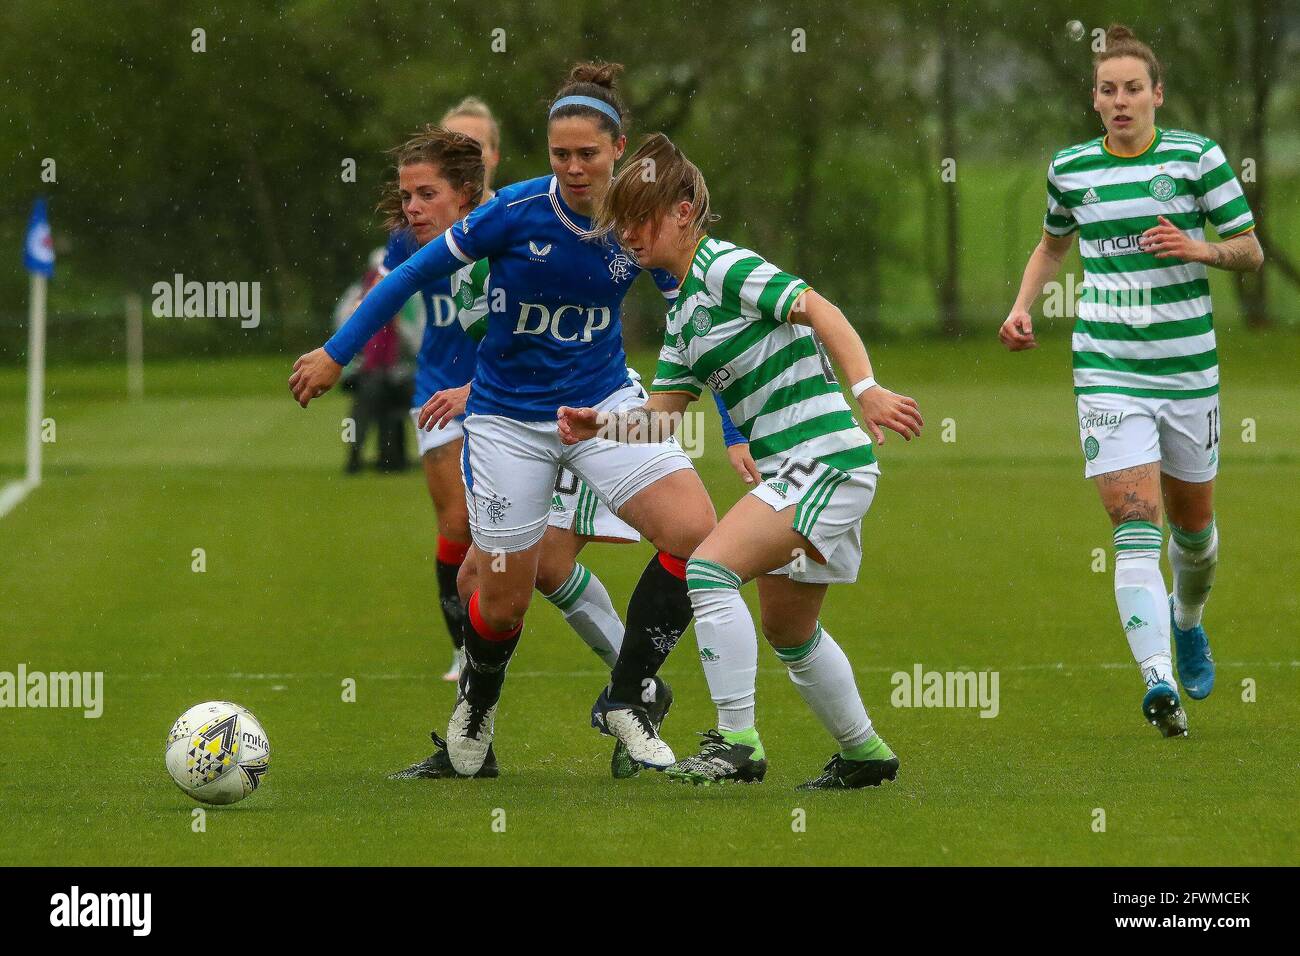 Milngavie, East Dunbartonshire, Scotland. 23rd May, 2021. Zoe Ness (#9) of Rangers Women FC shields the ball from Chloe Warrington (#22) of Celtic Women FC during the Scottish Building Society Scottish Women's Premier League 1 Fixture Rangers FC vs Celtic FC, Rangers Training Complex, Milngavie, East Dunbartonshire, 23/05/2021 | Credit Colin Poultney | www.Alamy.co.uk Credit: Colin Poultney/Alamy Live News Stock Photo